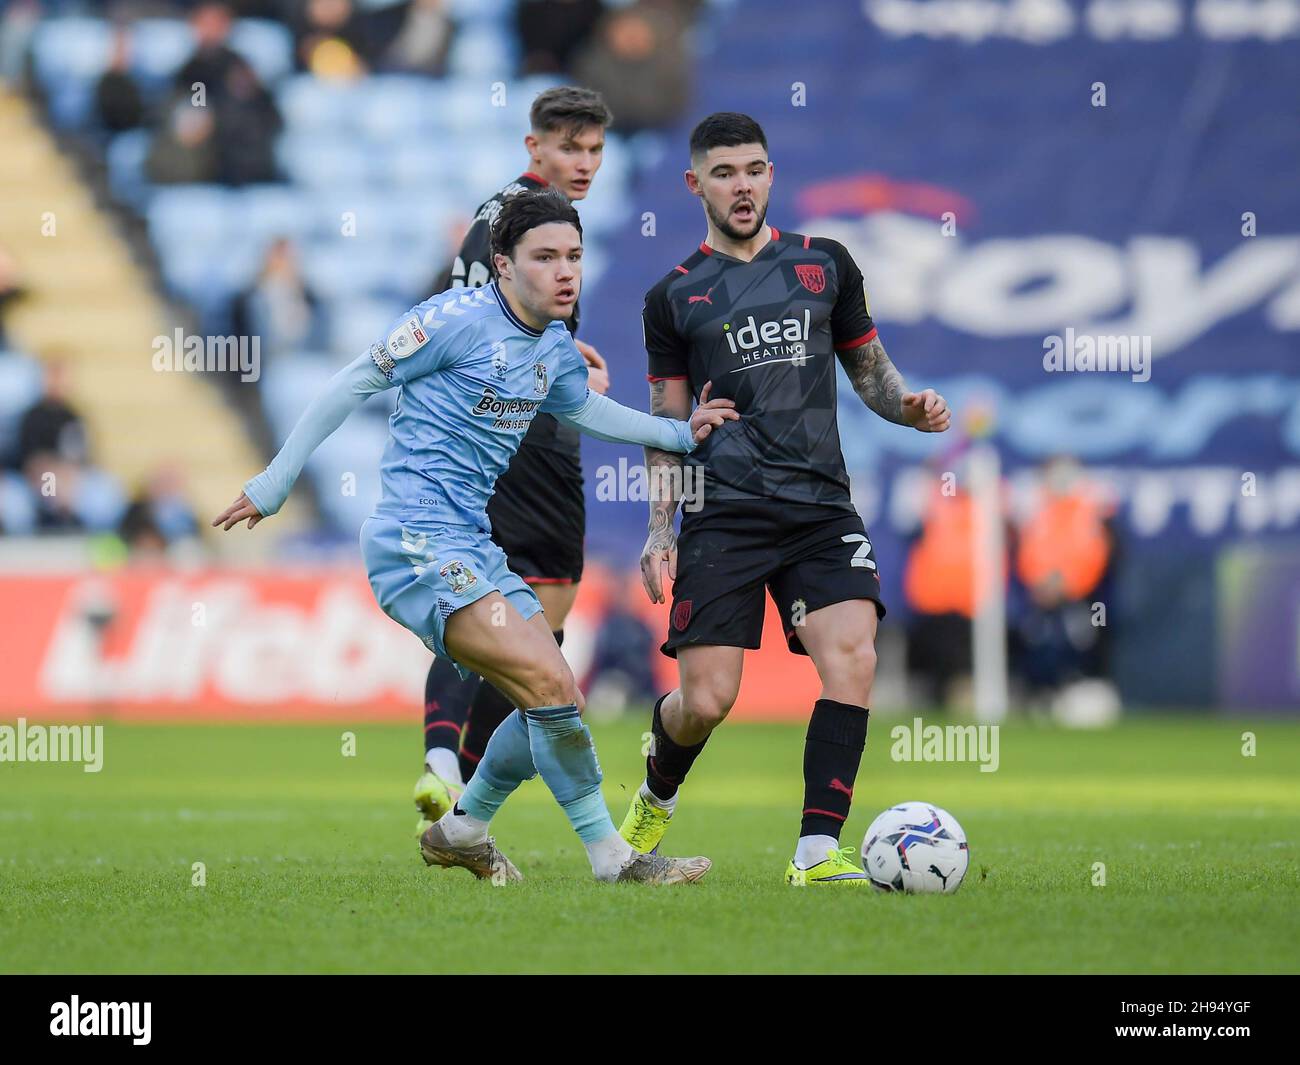 Callum O'Hare #10 of Coventry City battles Alex Mowatt #27 of West Bromwich Albion for the ball on the half way line. Stock Photo